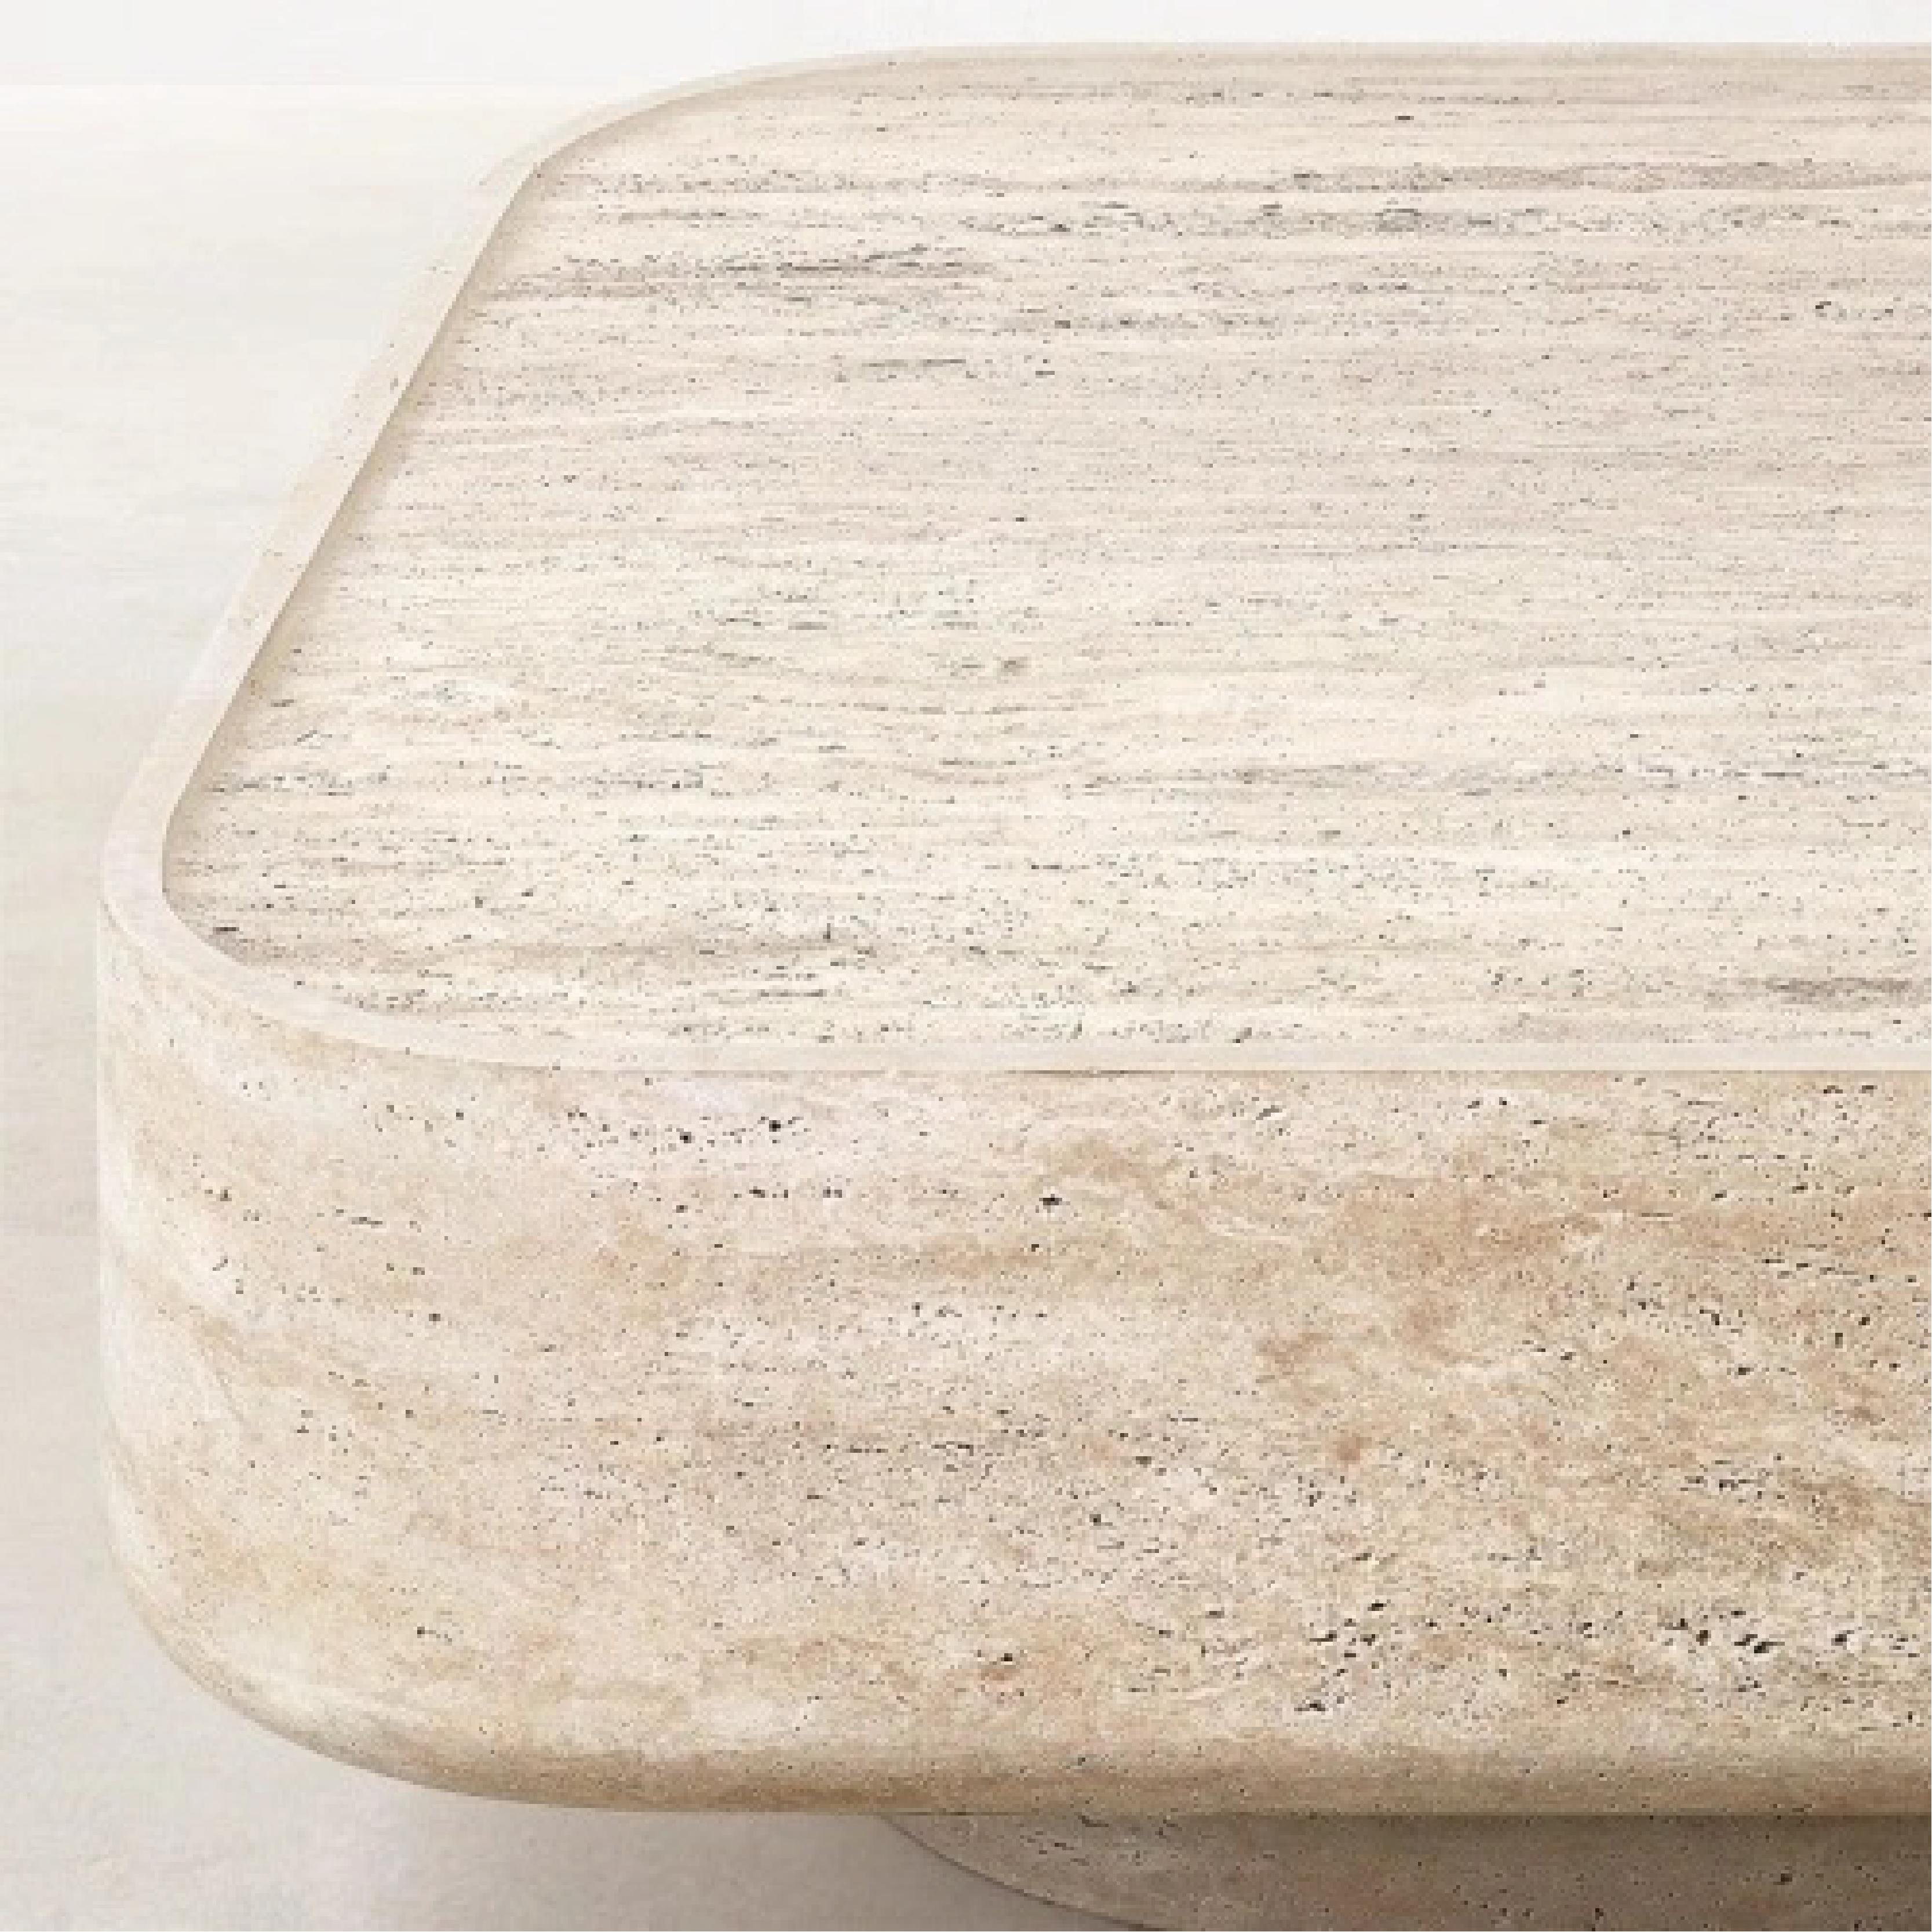 Inspired by the beauty found in imperfection, the Nordic Destruction design embraces a raw aesthetic, celebrating the authenticity of natural materials. The juxtaposition of the sleek rectangular form with the natural allure of travertine lends an